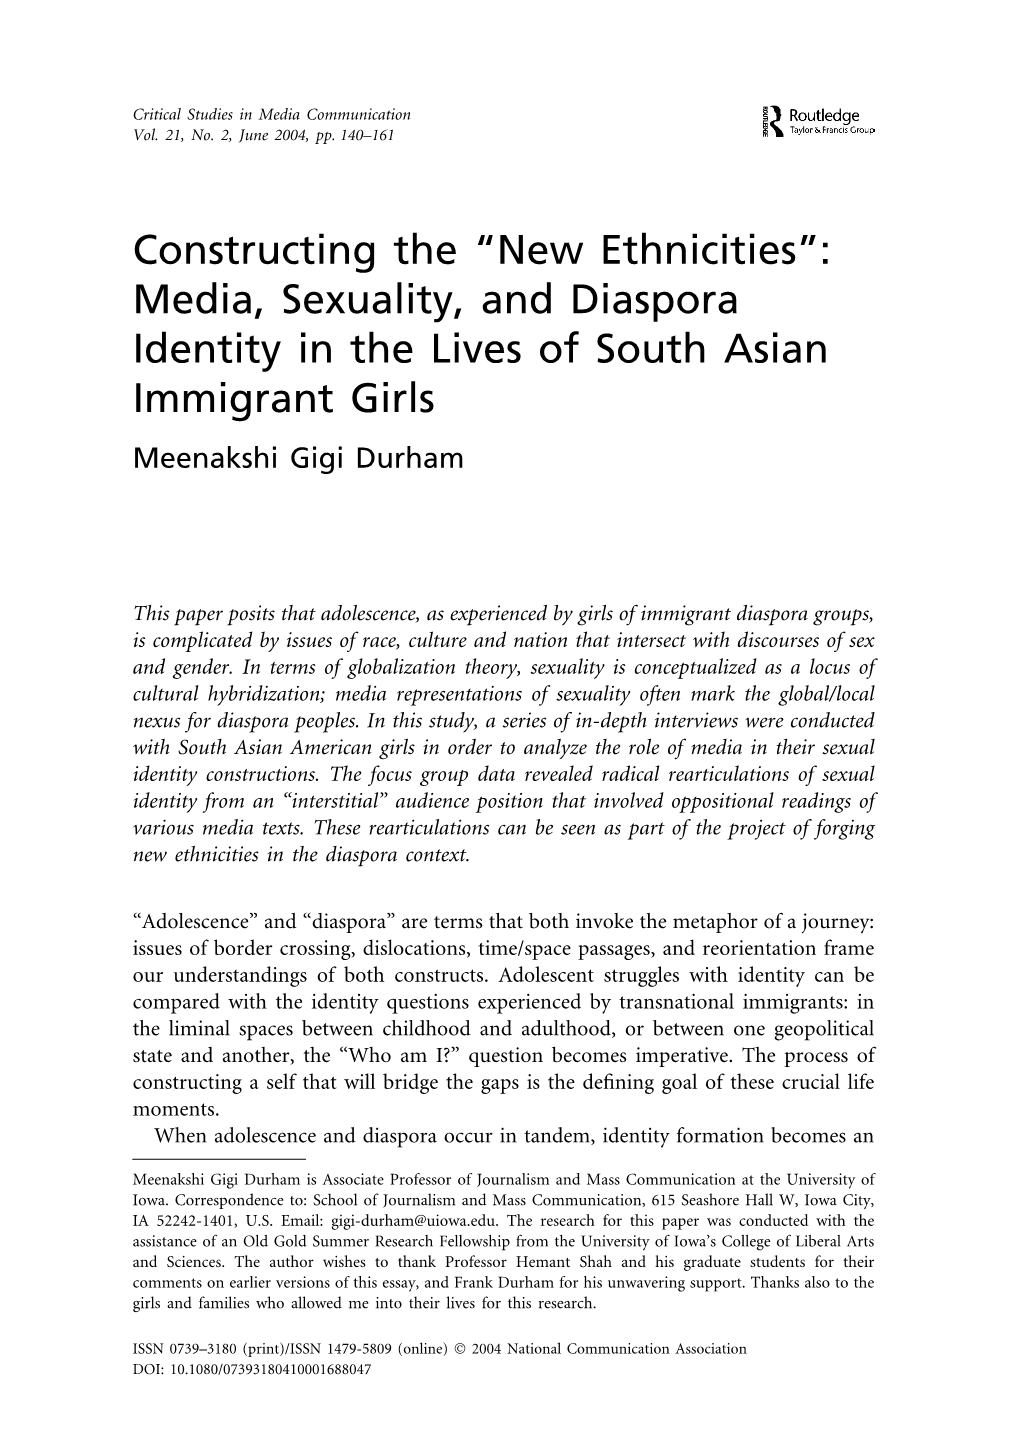 “New Ethnicities”: Media, Sexuality, and Diaspora Identity in the Lives of South Asian Immigrant Girls Meenakshi Gigi Durham